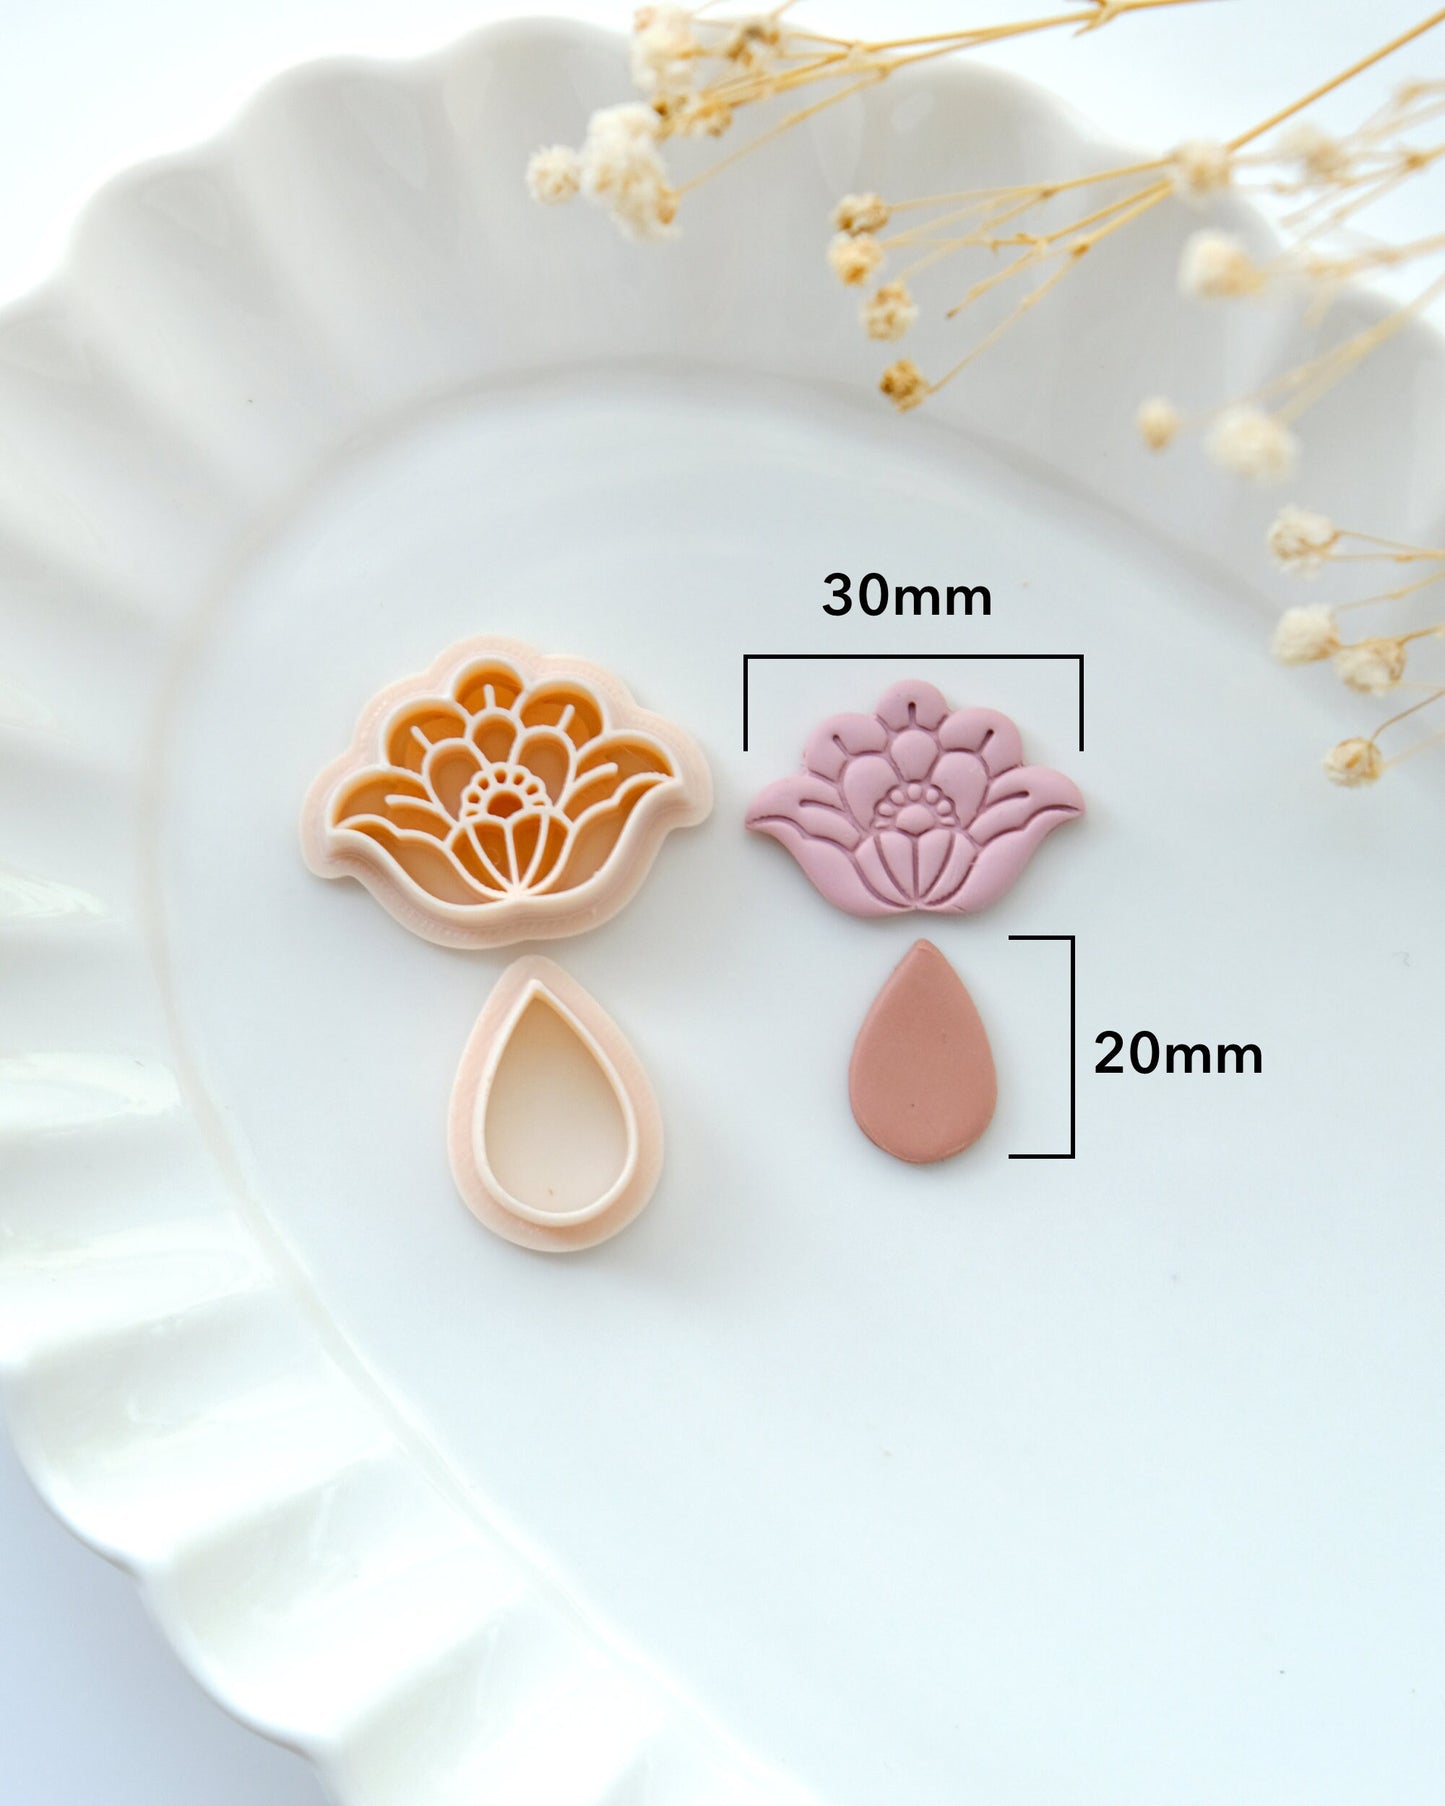 Art Deco Floral Polymer Clay Cutters | Spring Clay Cutters | Clay Earring Cutters | Jewelry Making | 3D Printed Cutters